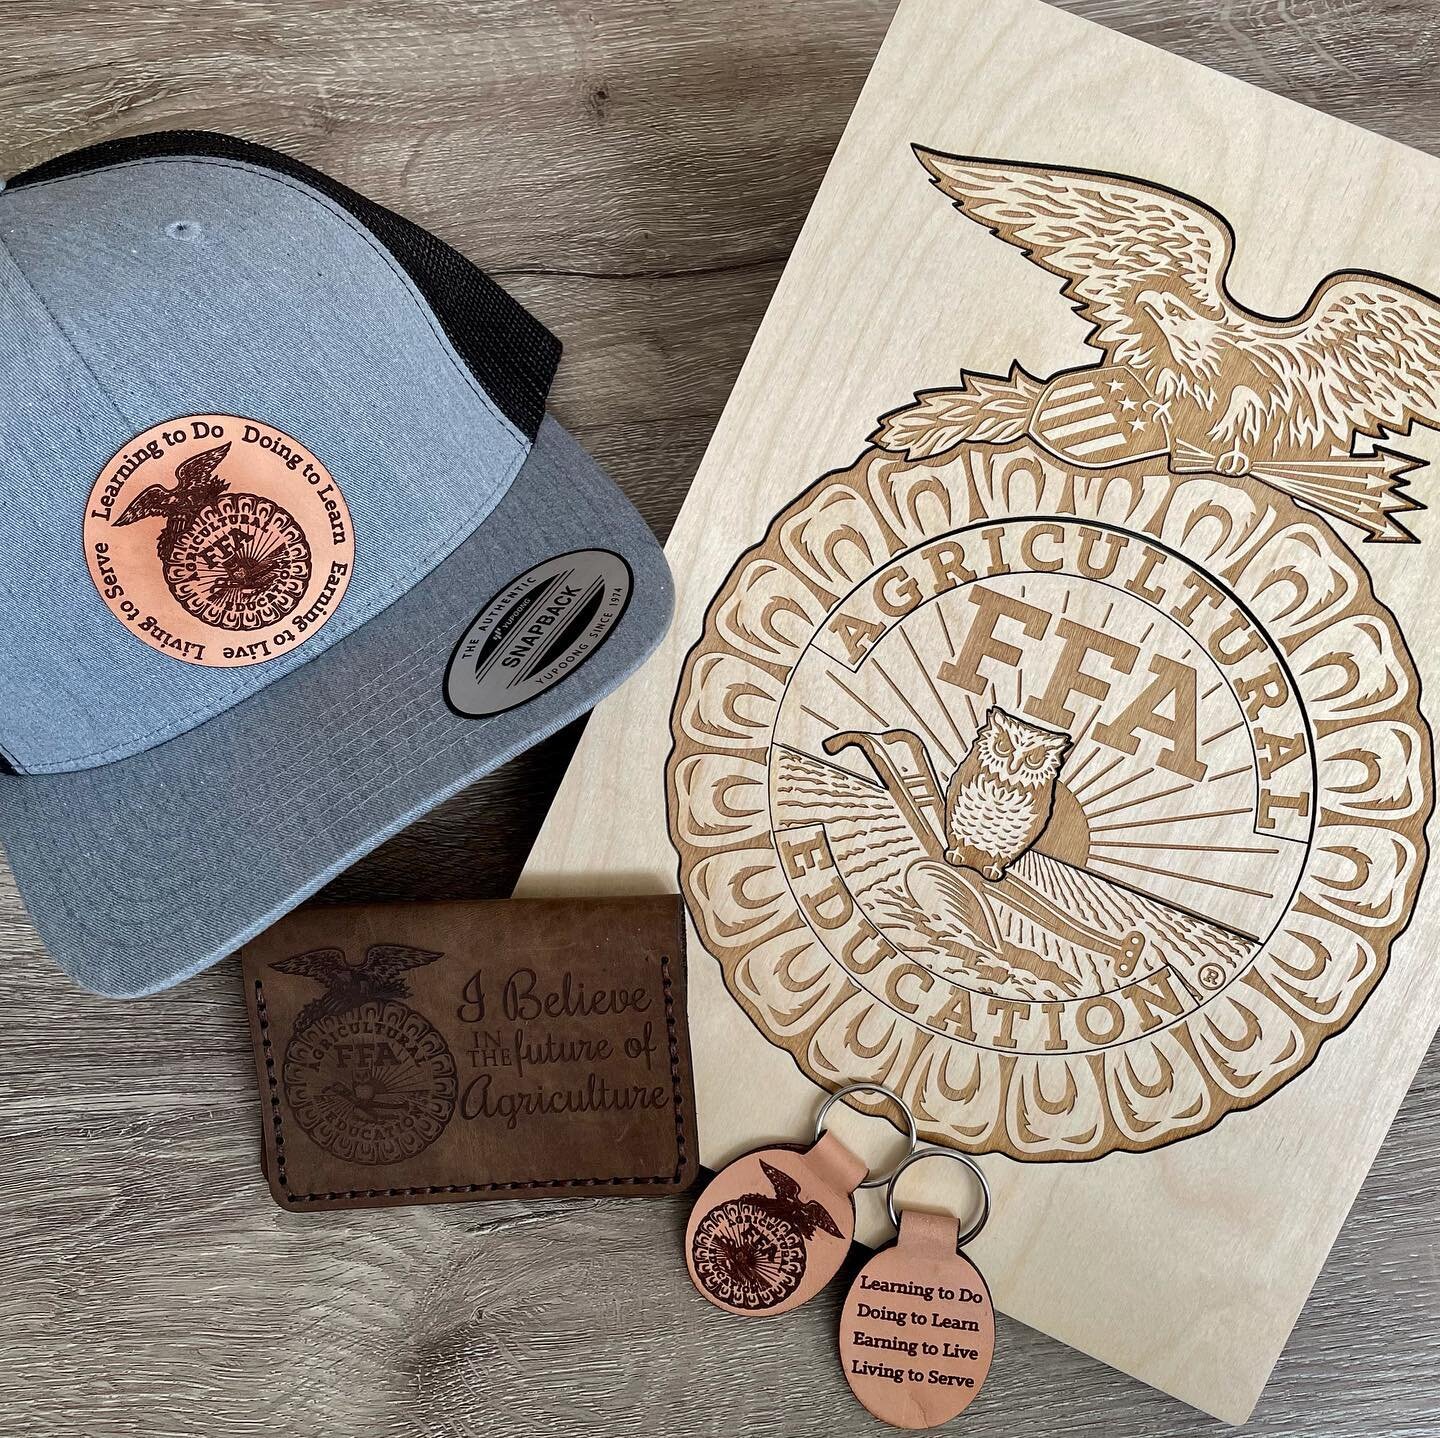 FFA Week Giveaway is LIVE!!! 🎉

You can now Nominate any current FFA Advisor to receive one of three prize packages! Winner will be announced on March 3rd, 2021

Prize Packages include :
1st Prize-Grey FFA Hat, Wallet, Parts of the FFA Emblem Puzzle